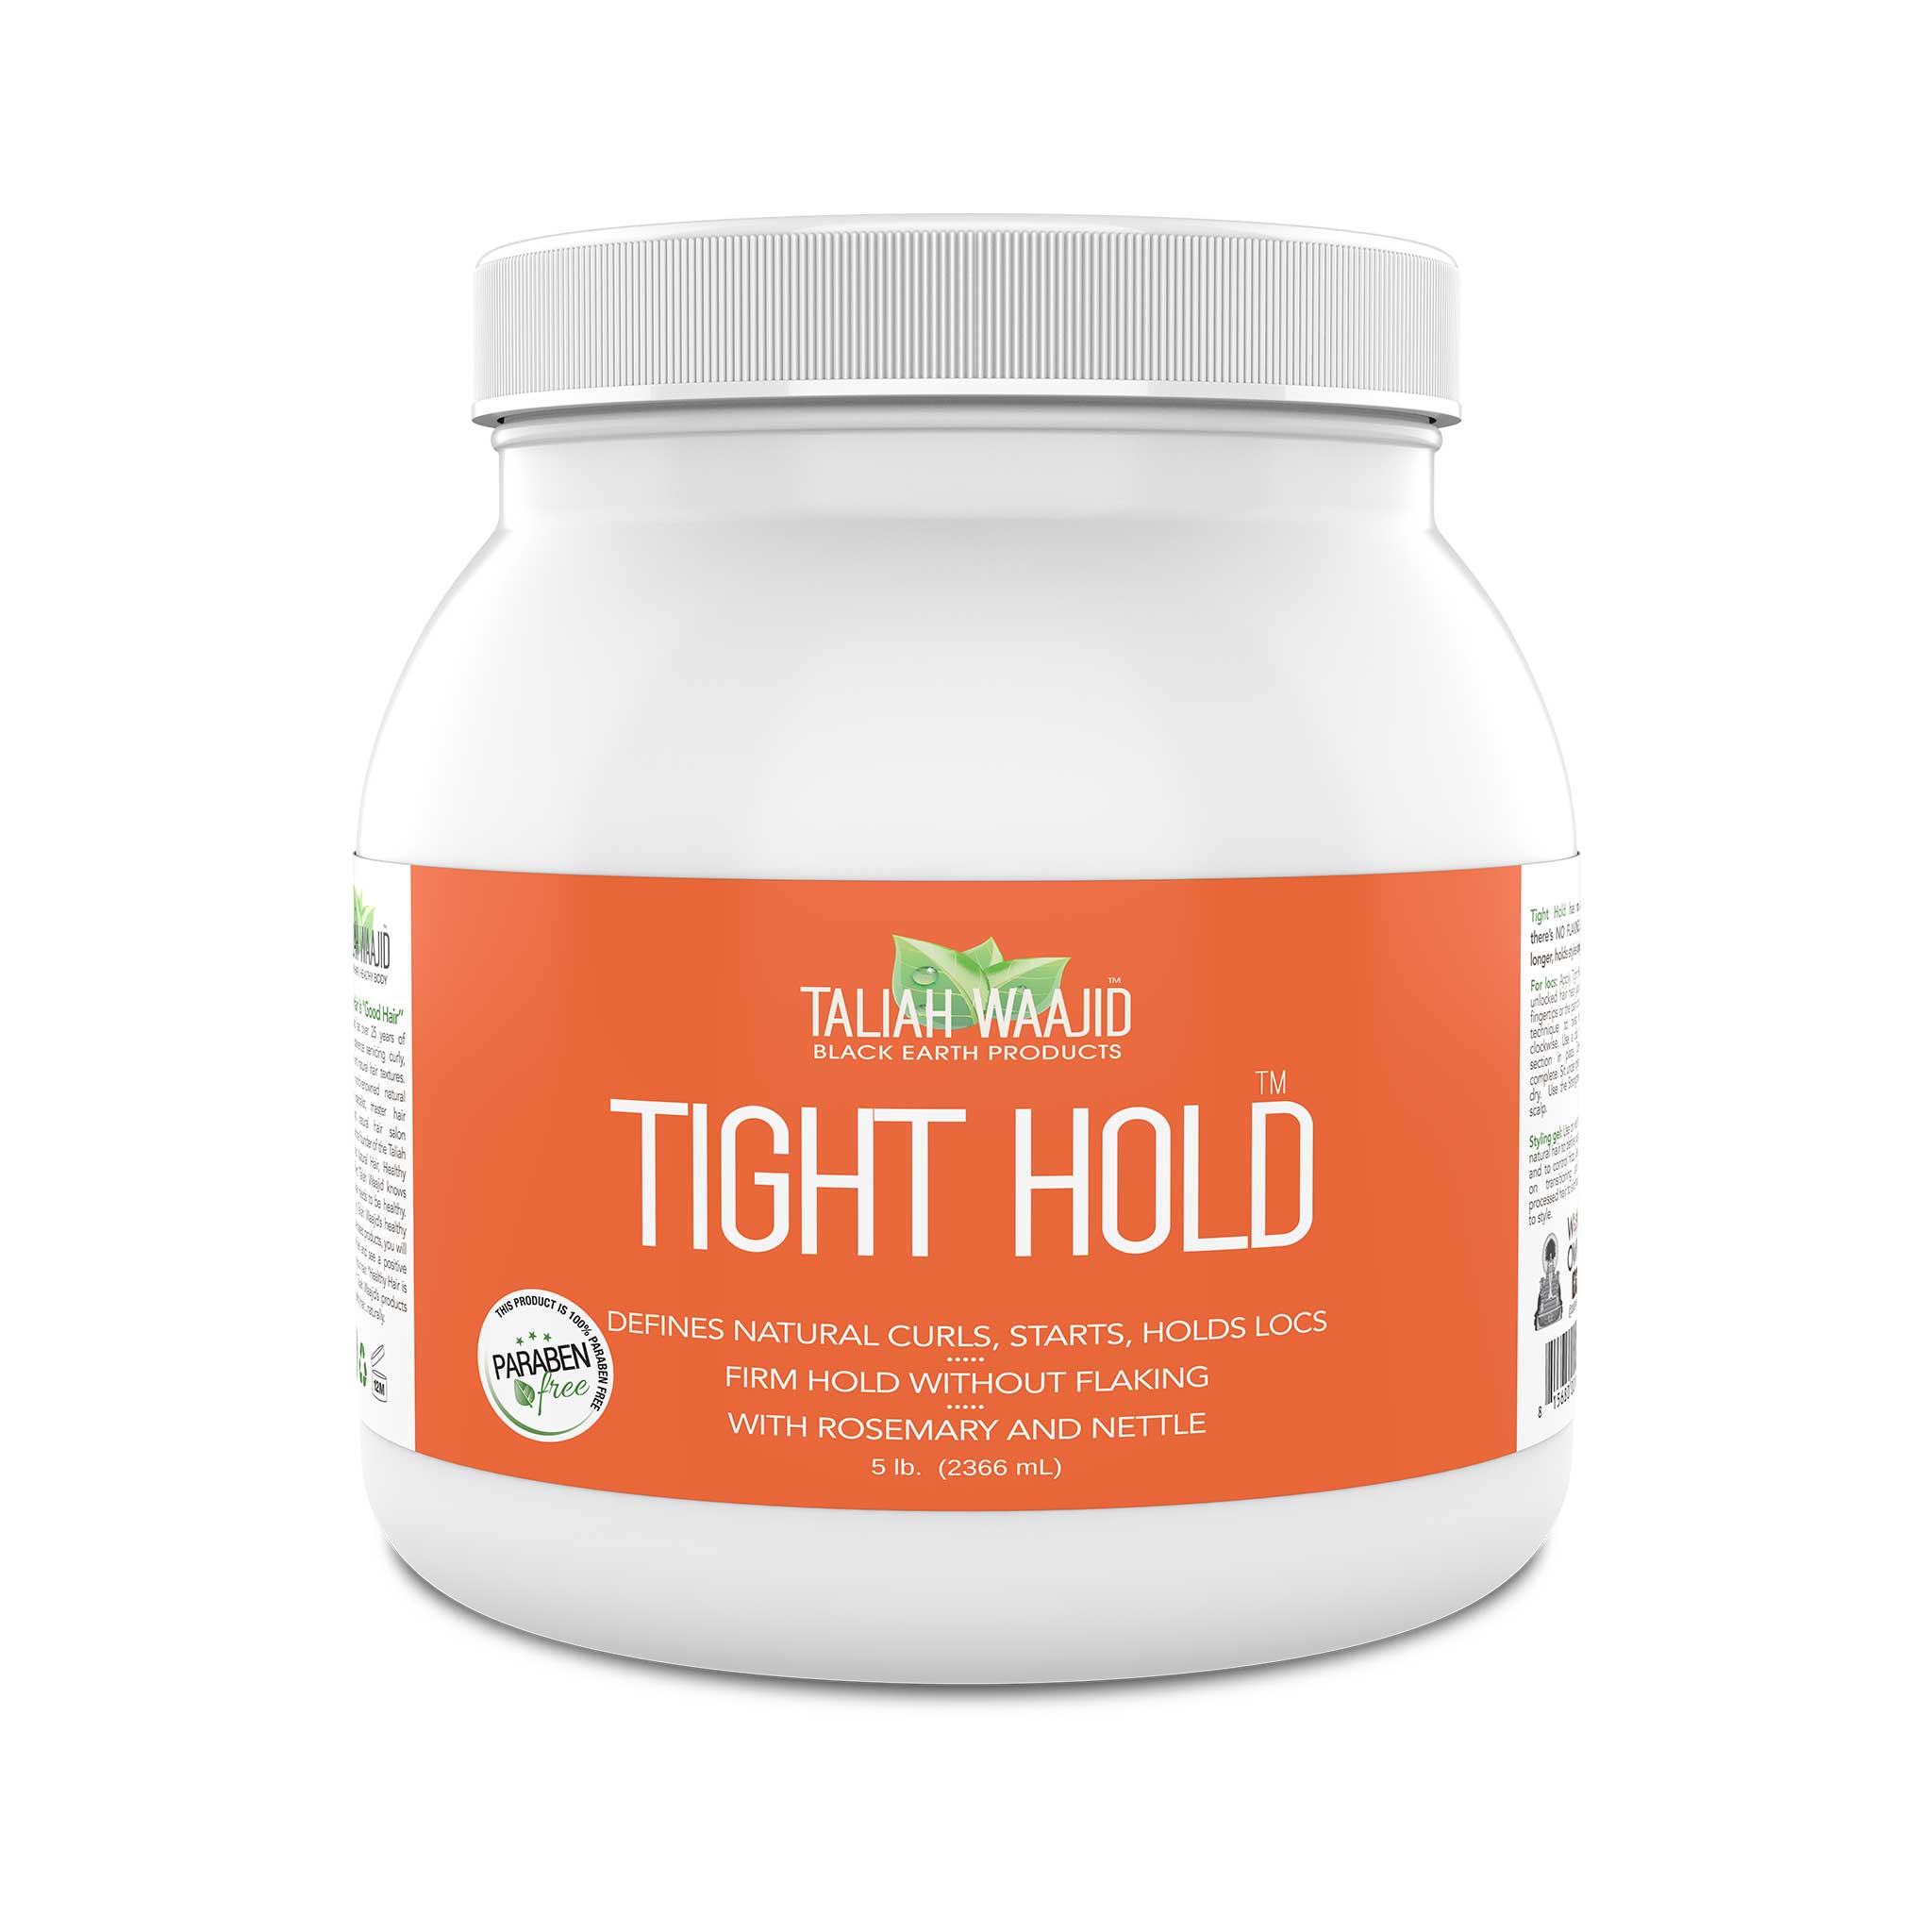 Black Earth Products Tight Hold for Natural Hair 5lb